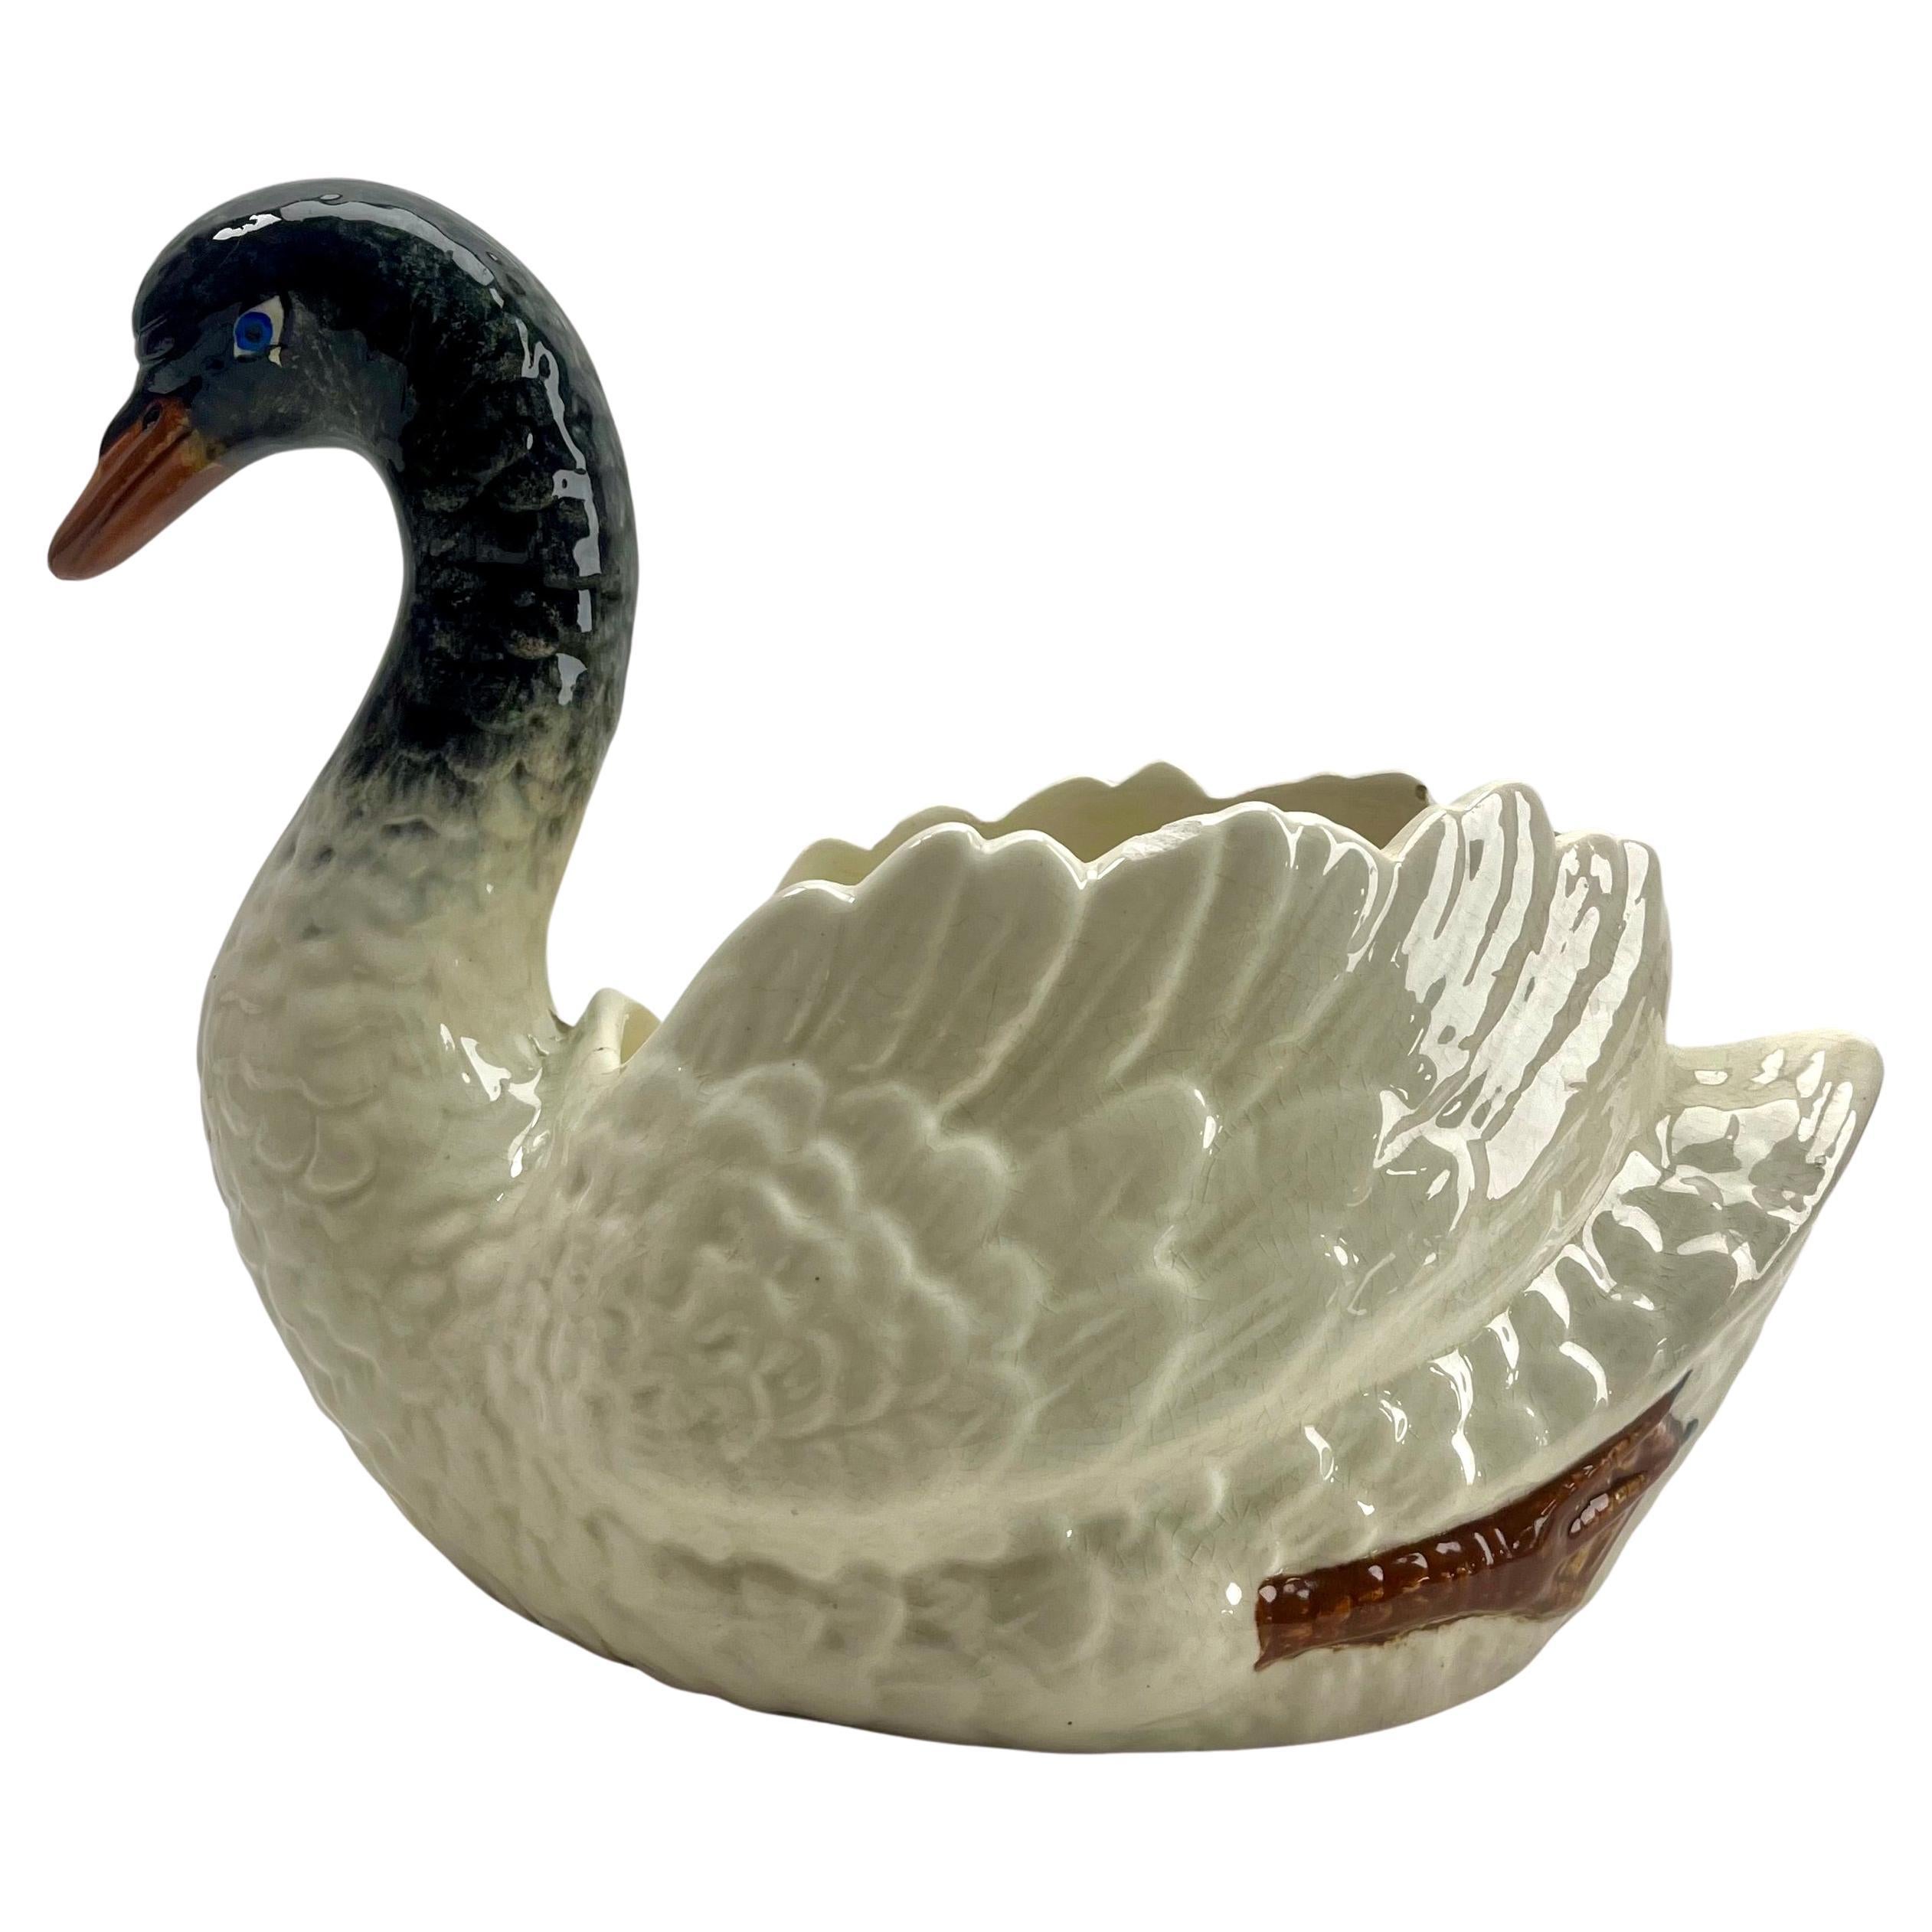 Majolica white swan jardinière Nimy, circa 1900.

A real treasure for the ceramics' collector.
Small chip to top rim not visible during use see photo.

Please don't hesitate to get in touch with any further questions. 

With best wishes,